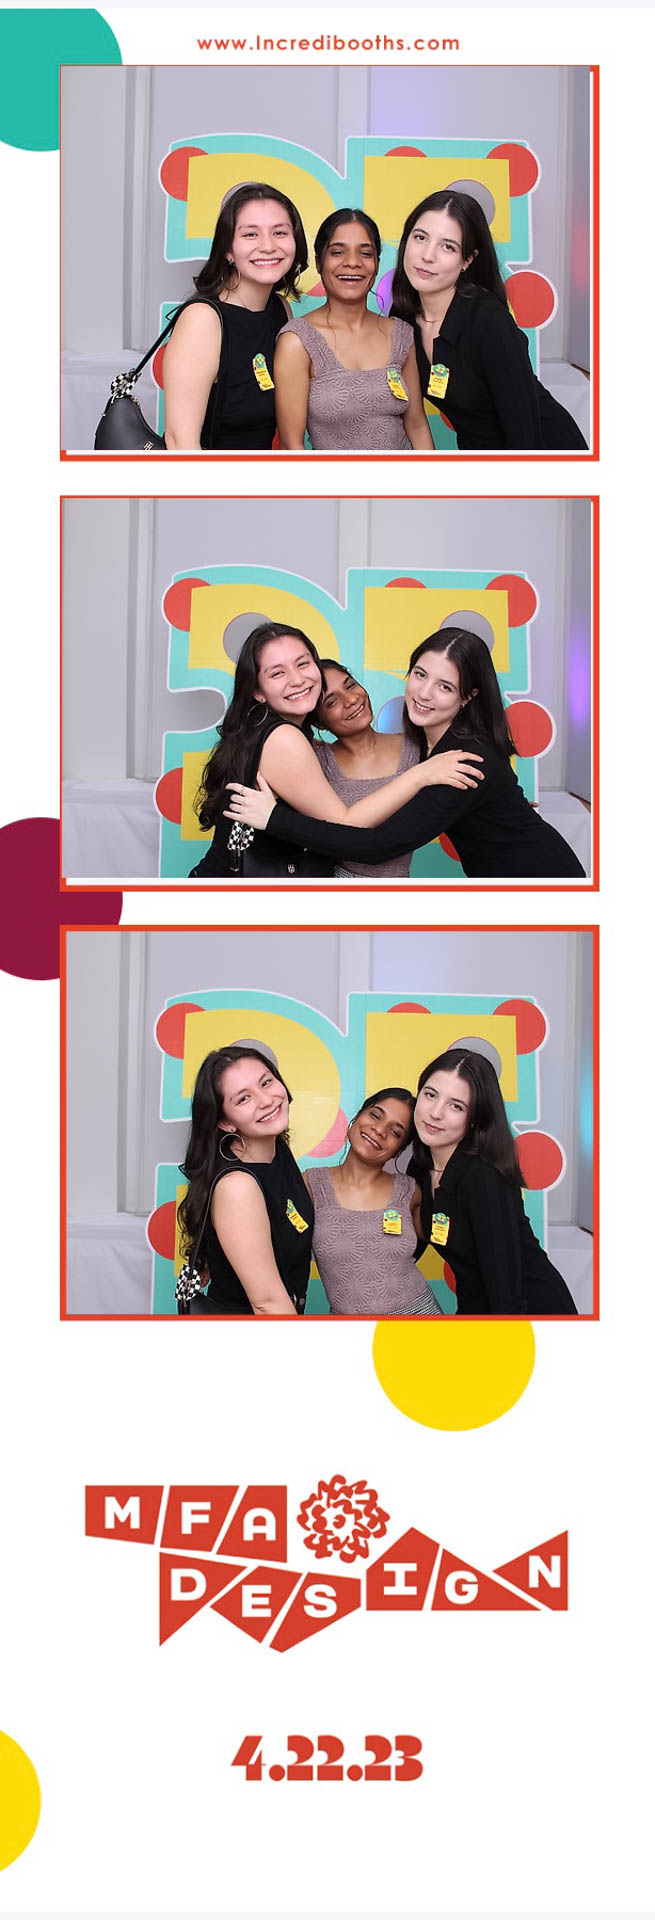 strip of 3 photos from a photo booth machine, people celebrating in front of a colorful sign